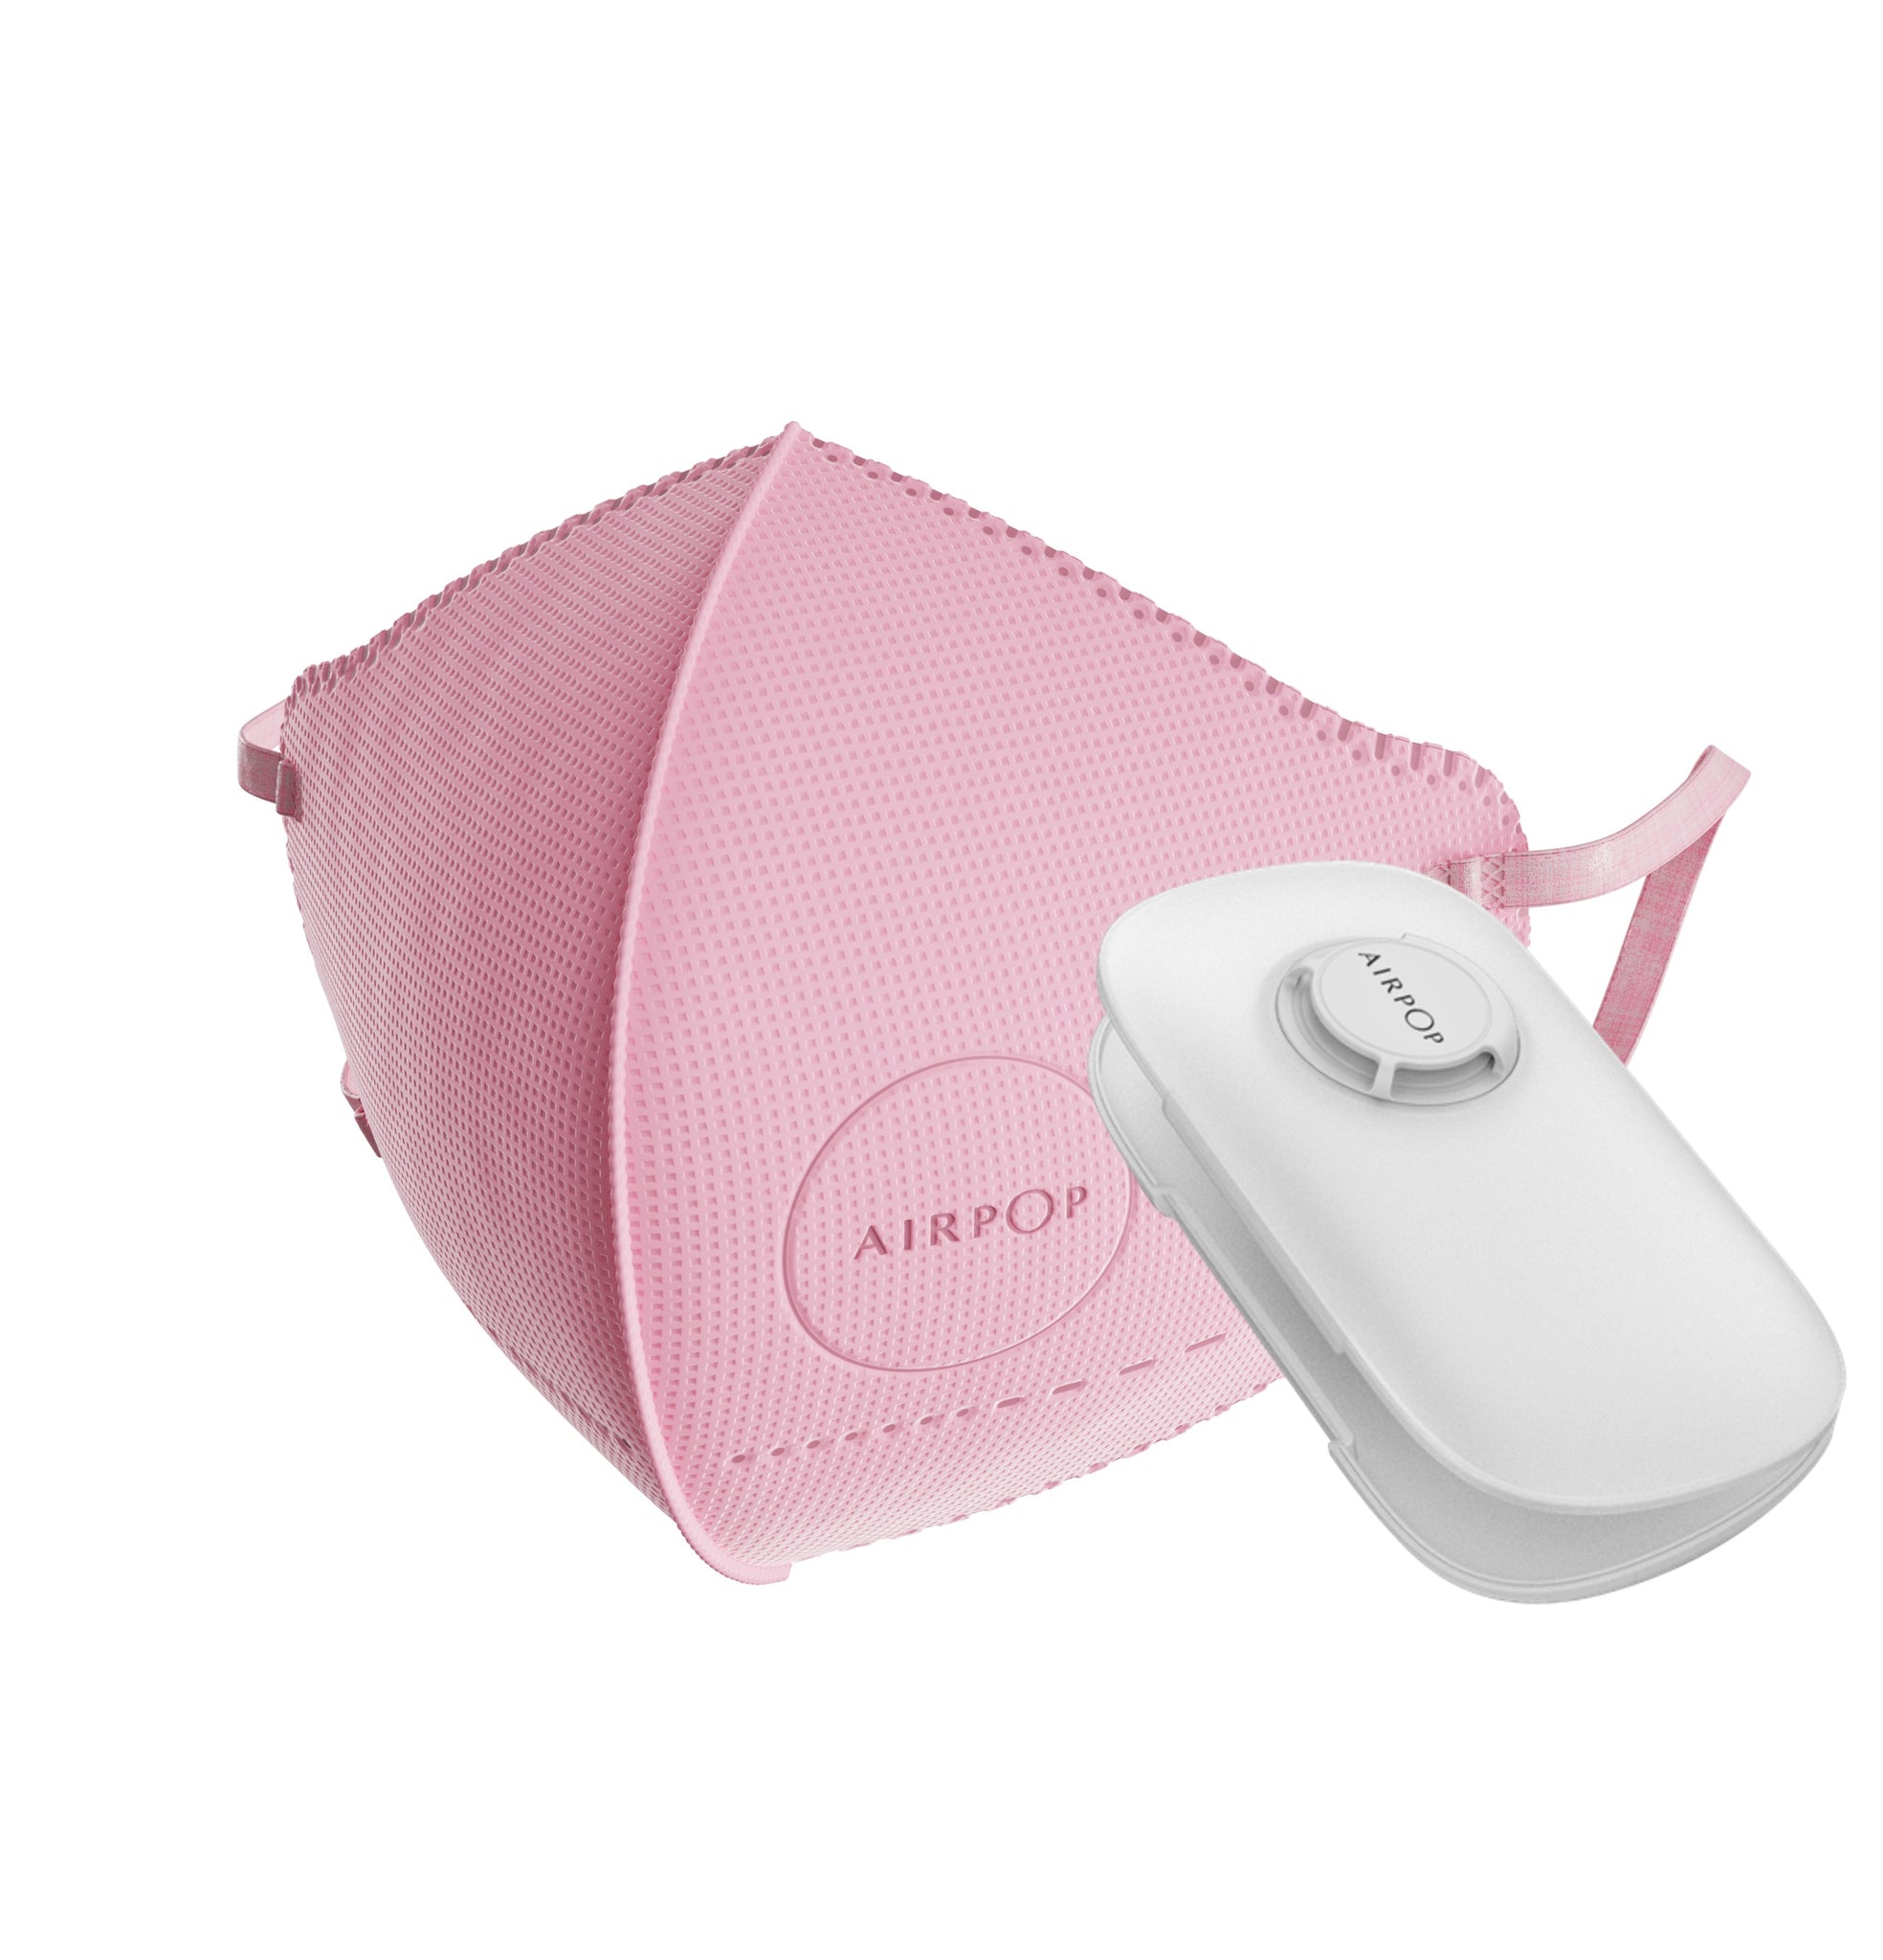 A breathable and comfortable AirPop Kids Mask with a remote control.